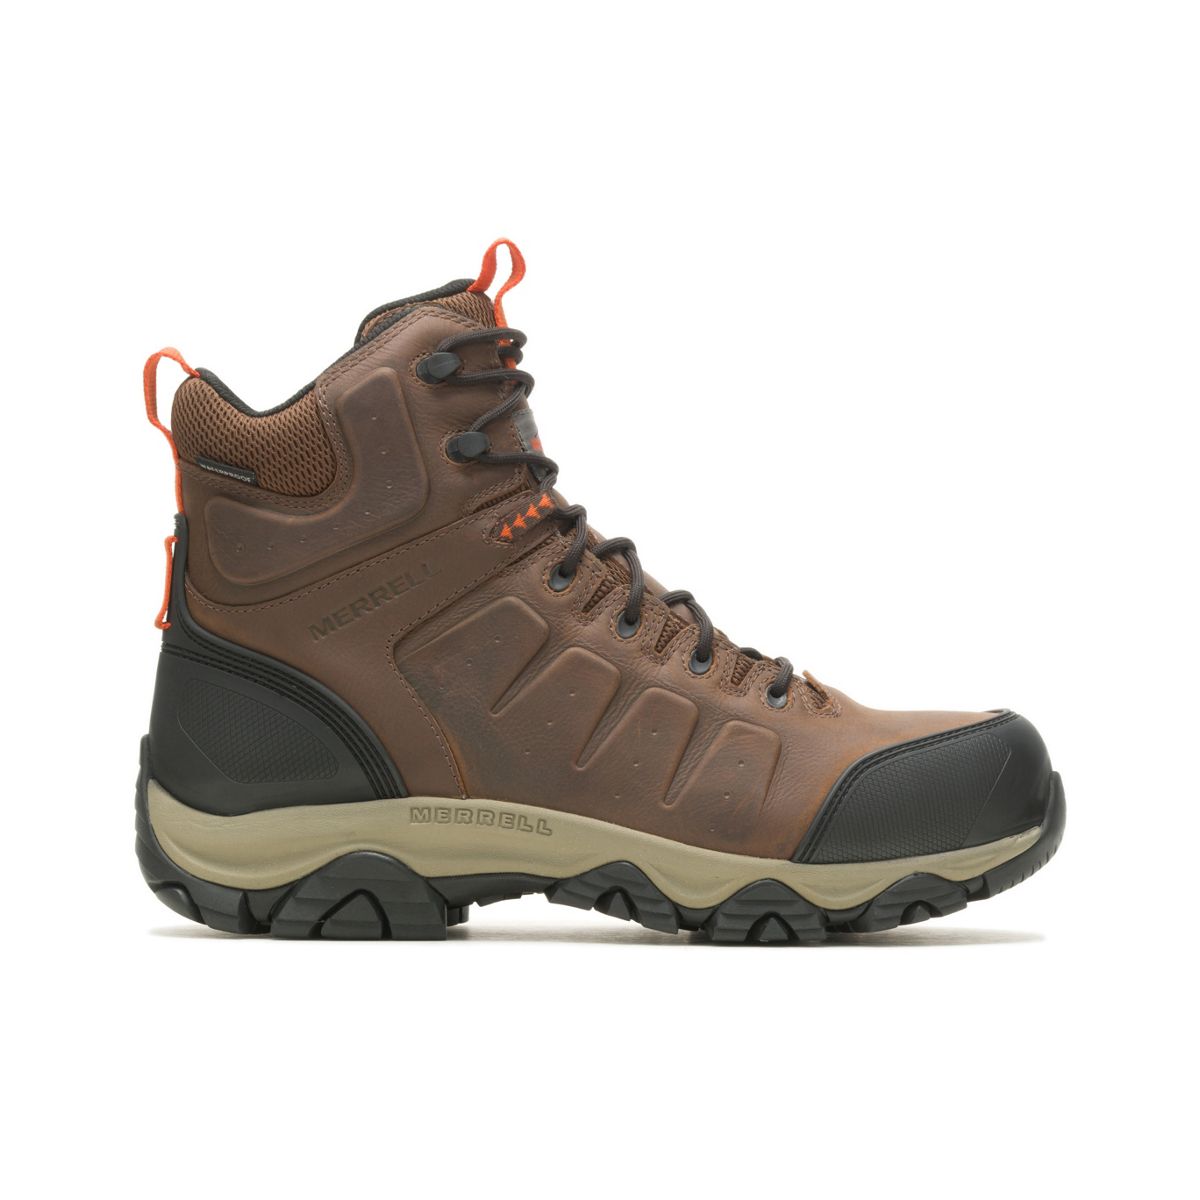 Phaserbound 2 Waterproof Carbon Fiber Safety Boots | Merrell